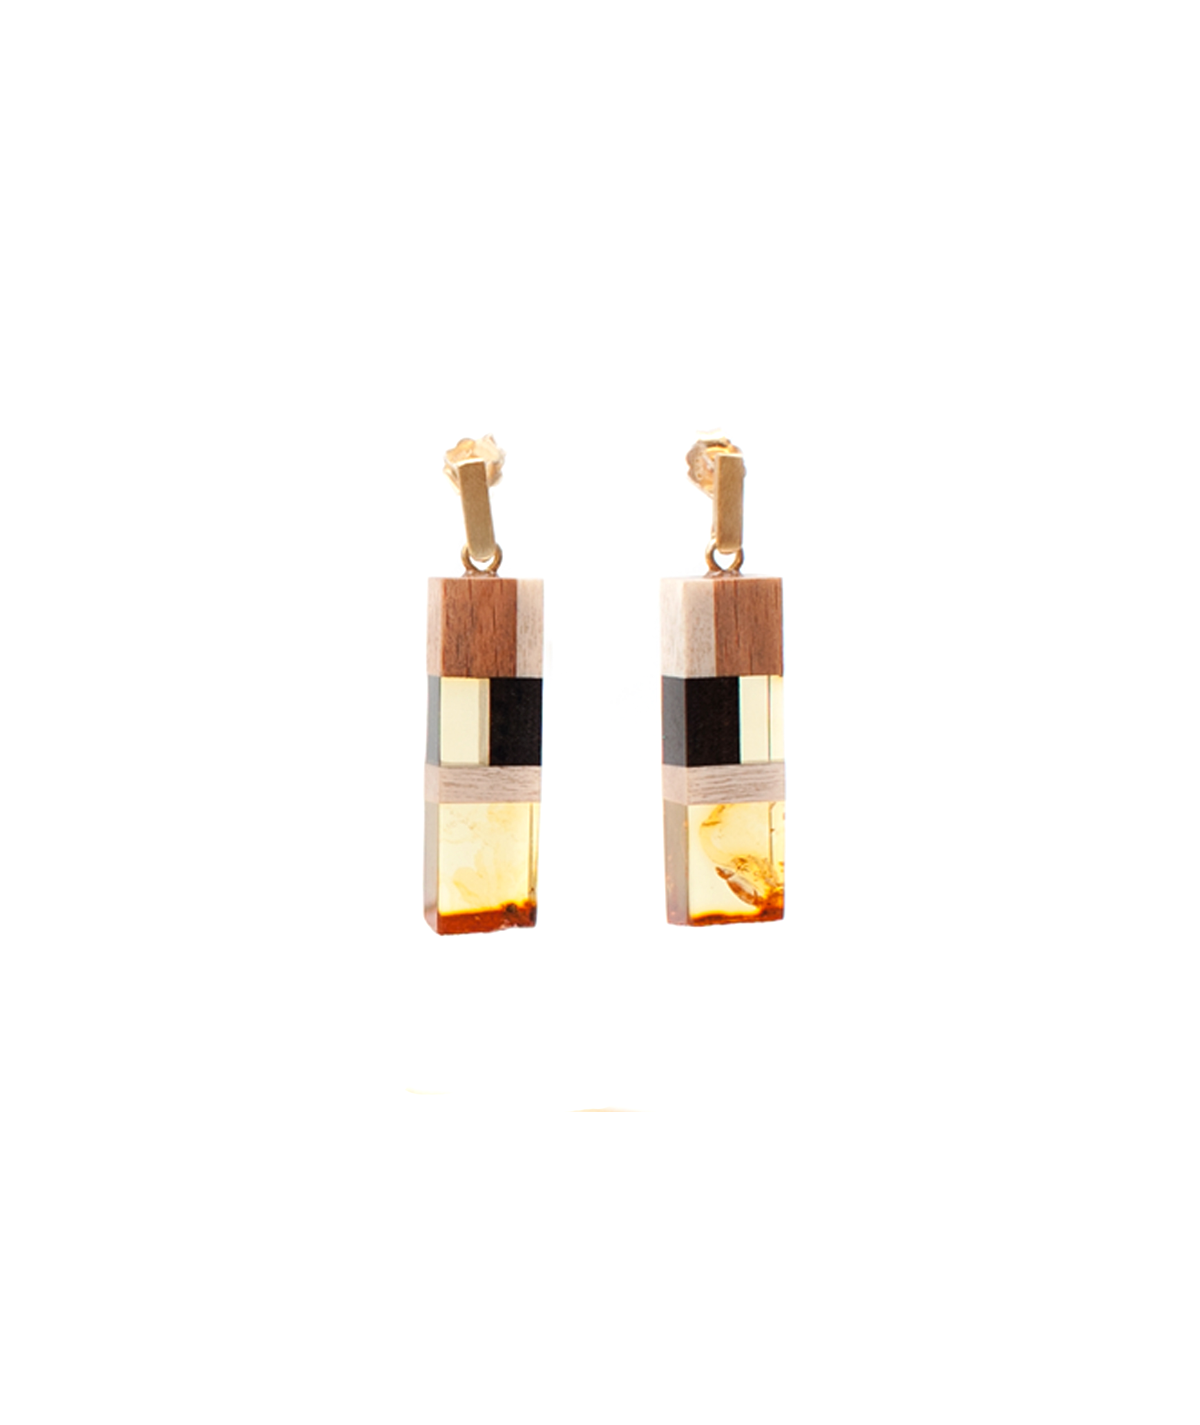 Earrings made of amber and wood on gold plated hooks.